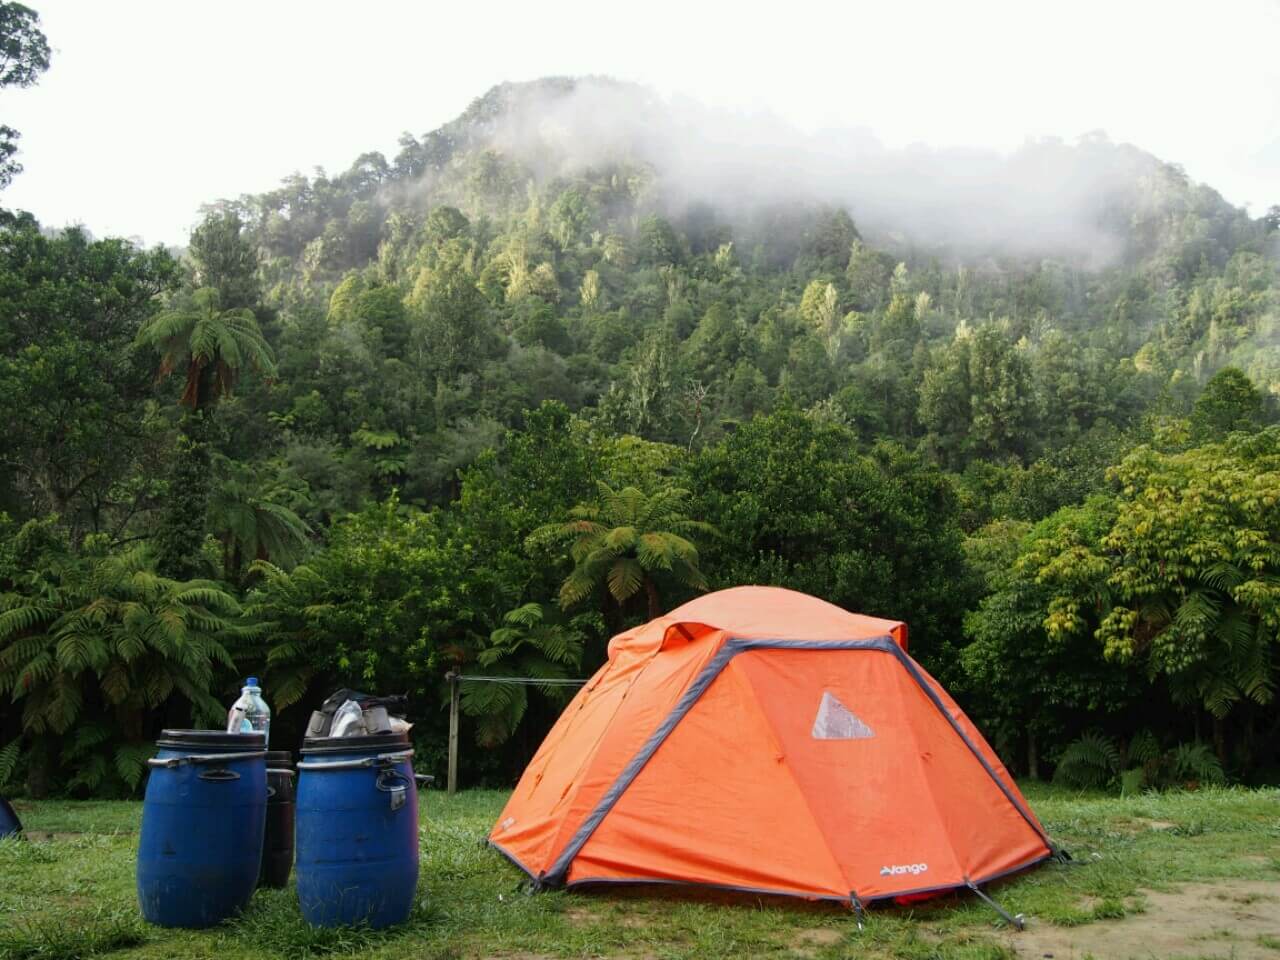 Waking up at John Coull campsite and looking out over the misty jungle